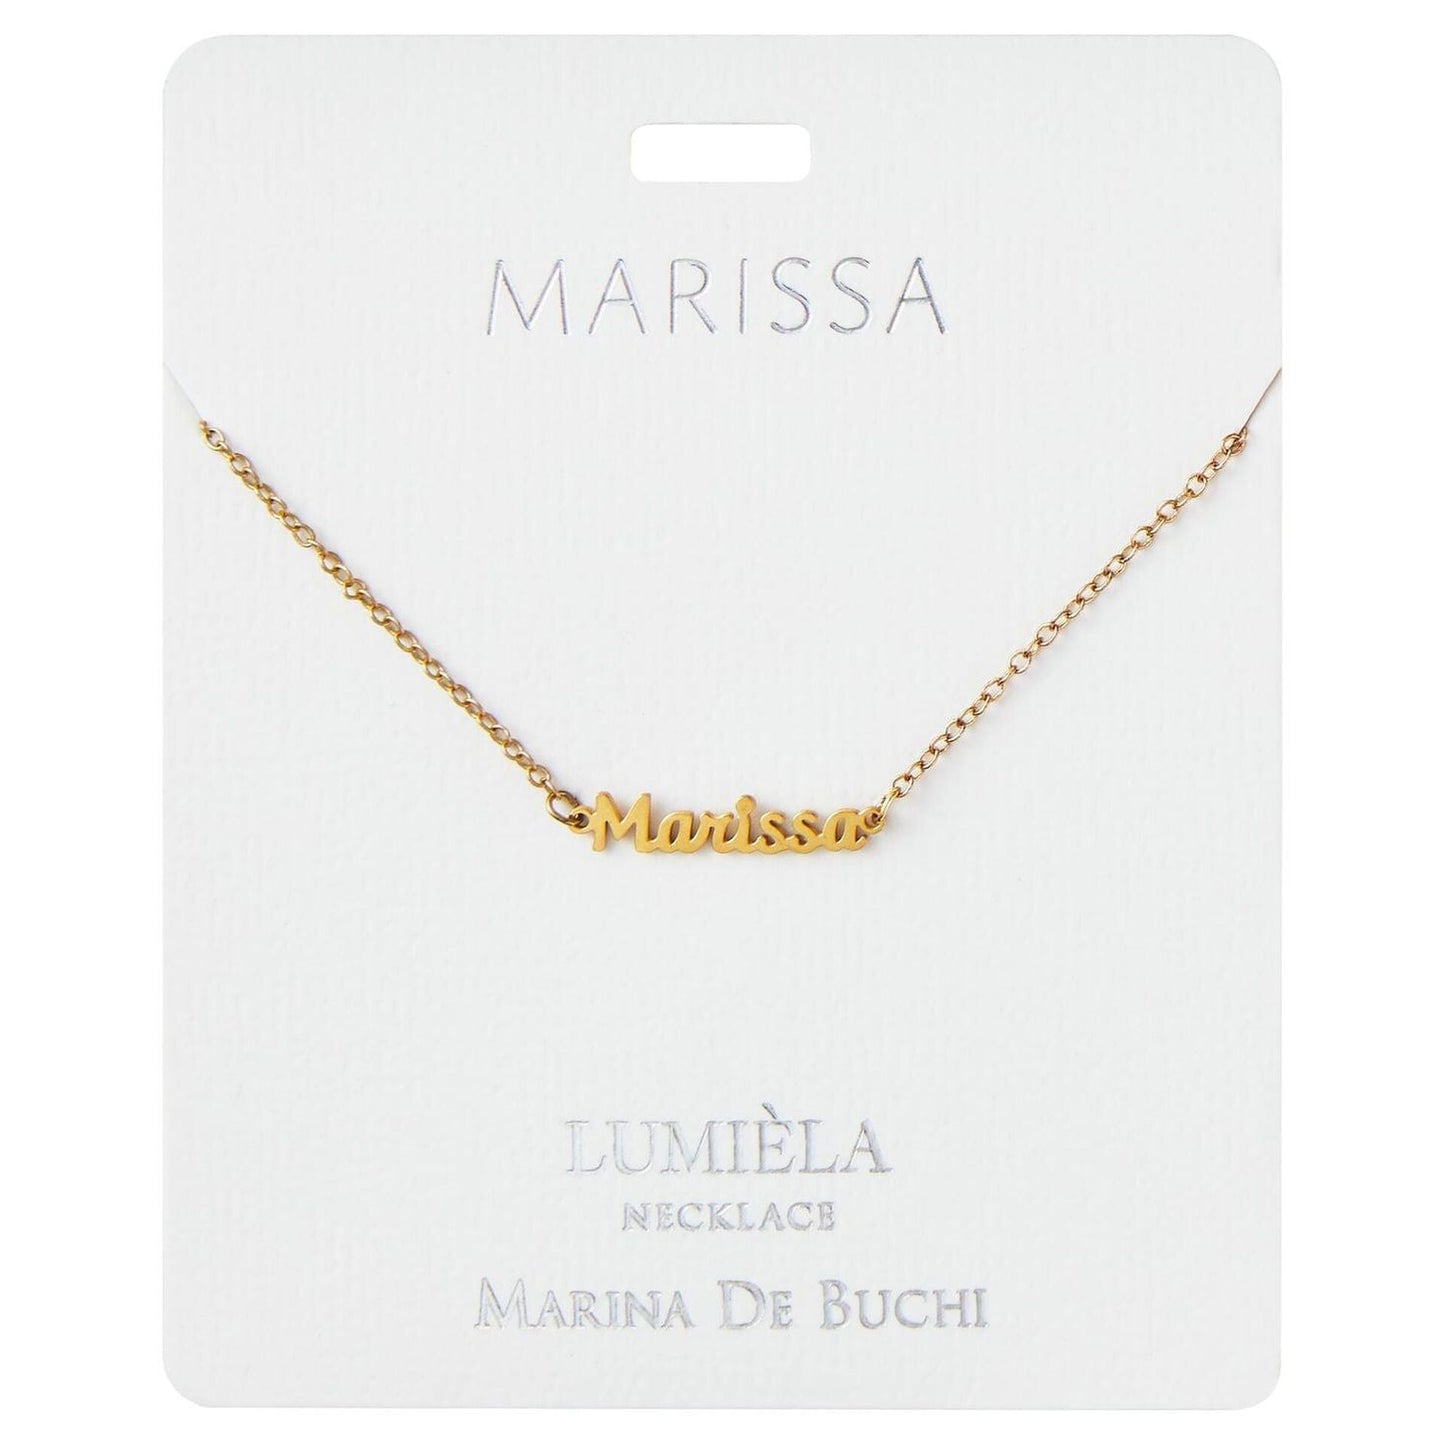 Lumiela Personalized Nameplate Breanna Necklace in Gold Tone